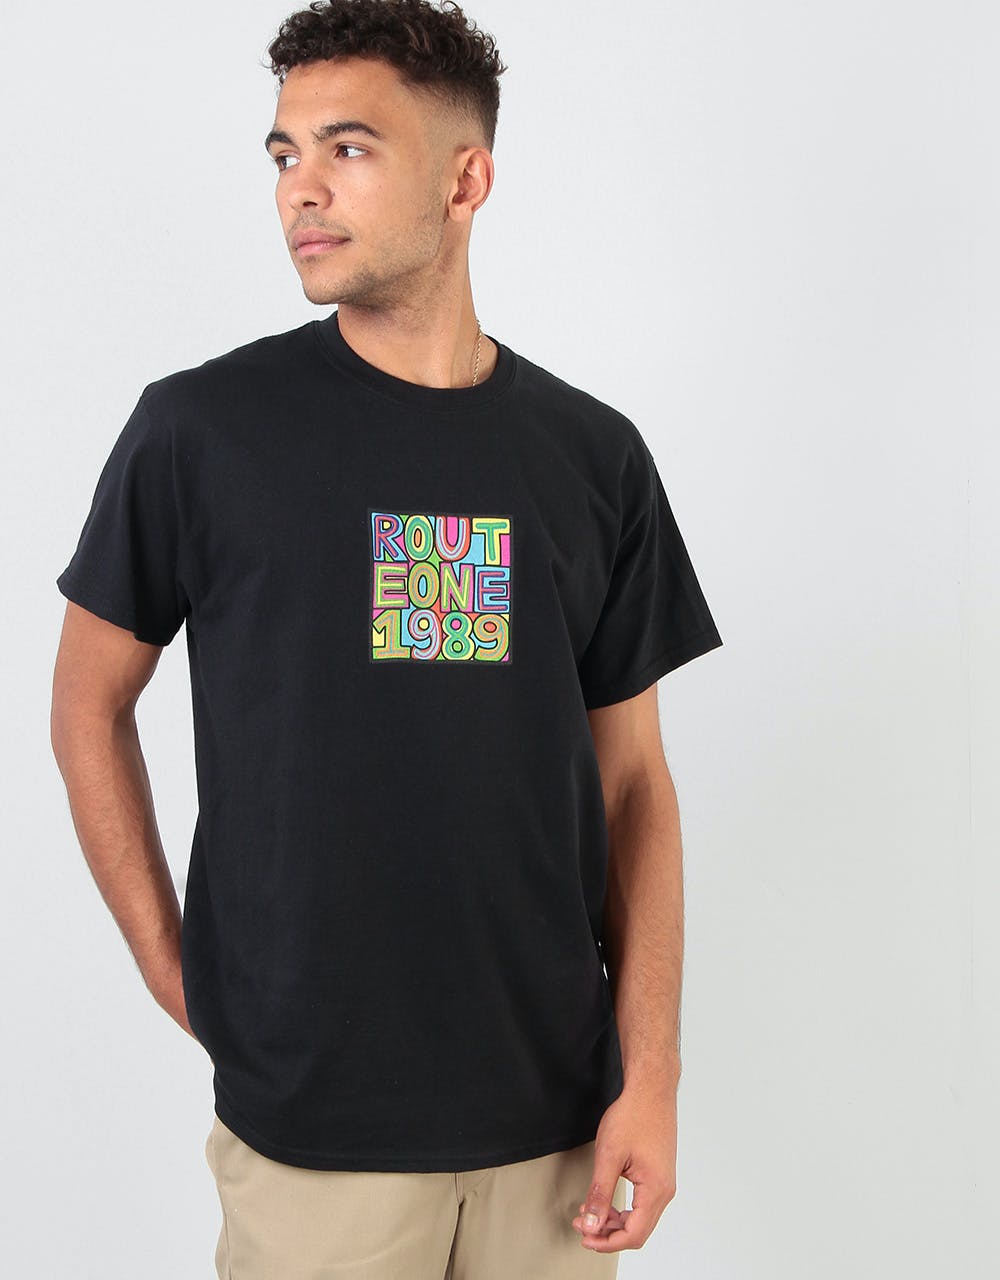 Route One Throwback T-Shirt - Black